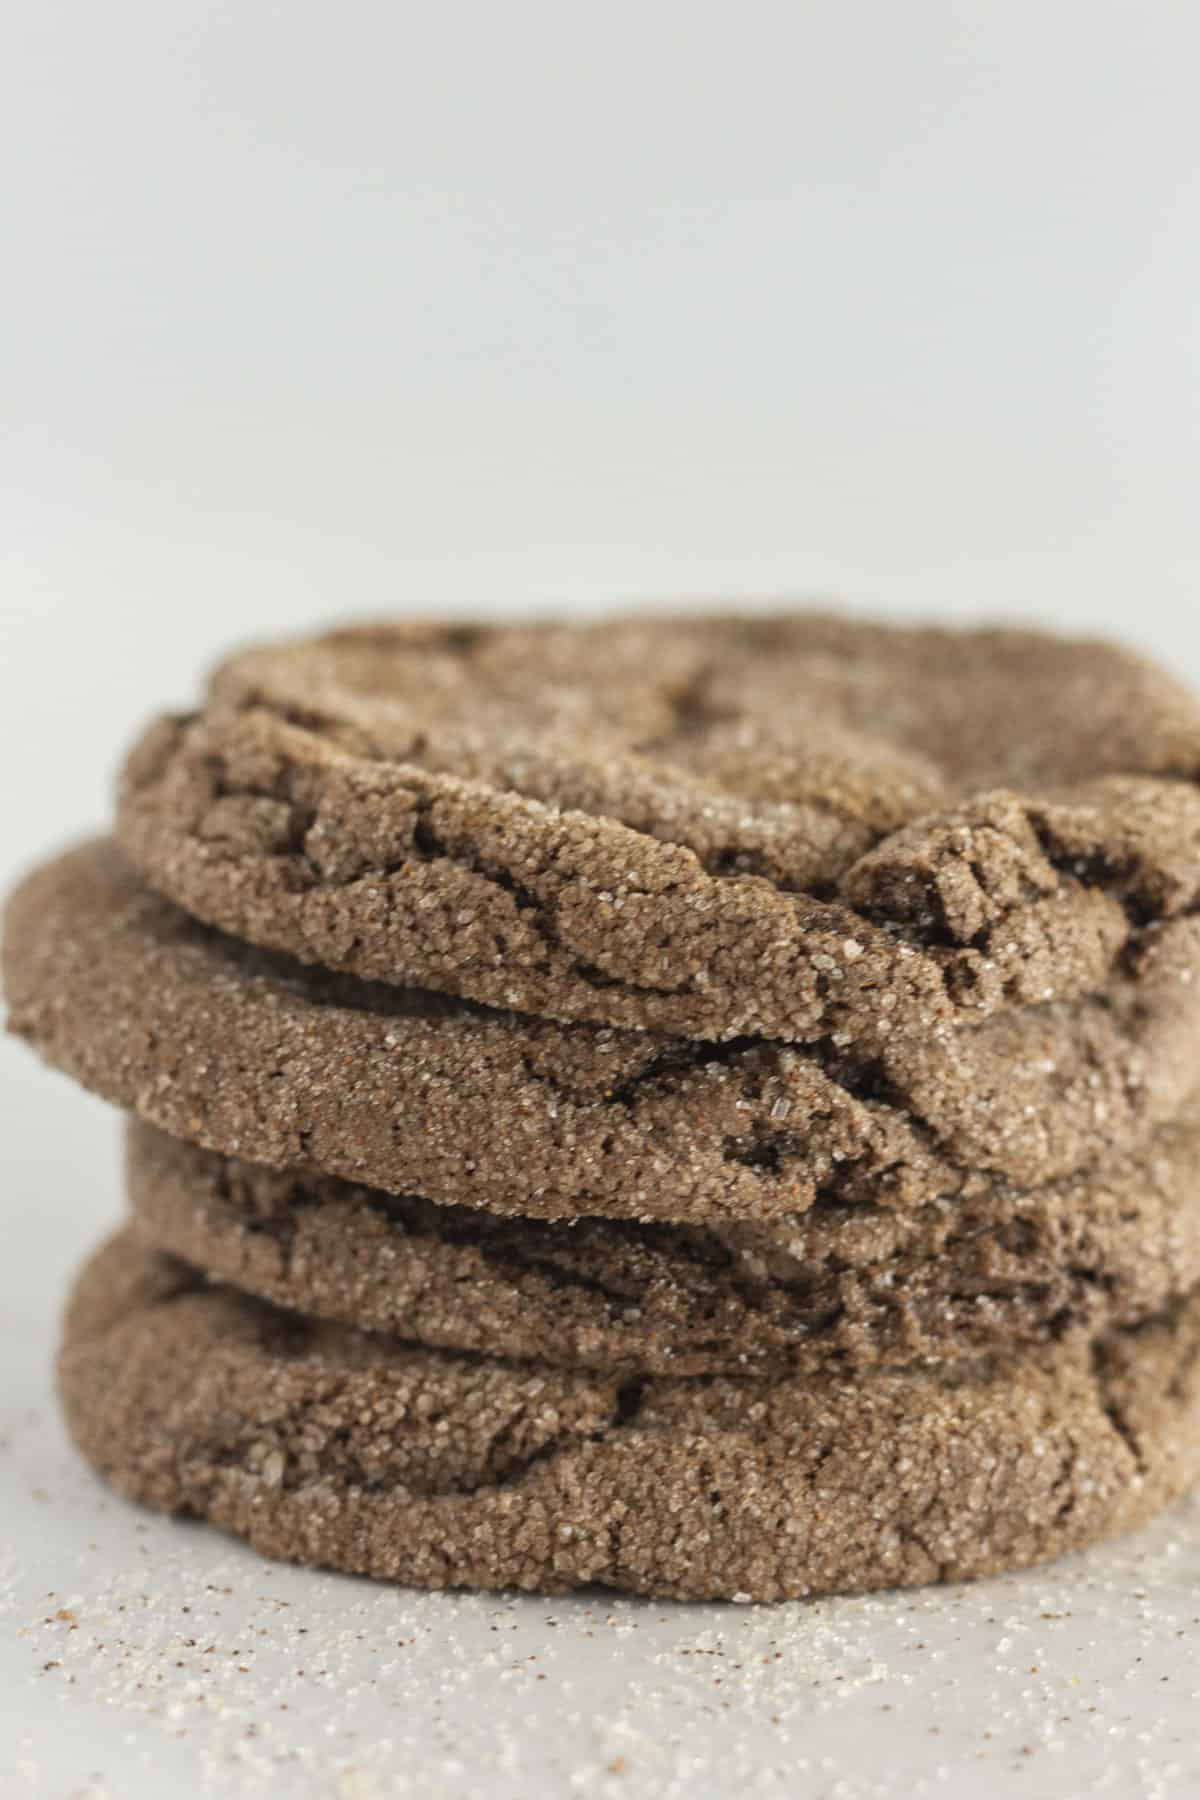 A stick of 4 Mexican Hot Chocolate Cookies with cinnamon sugar around them.